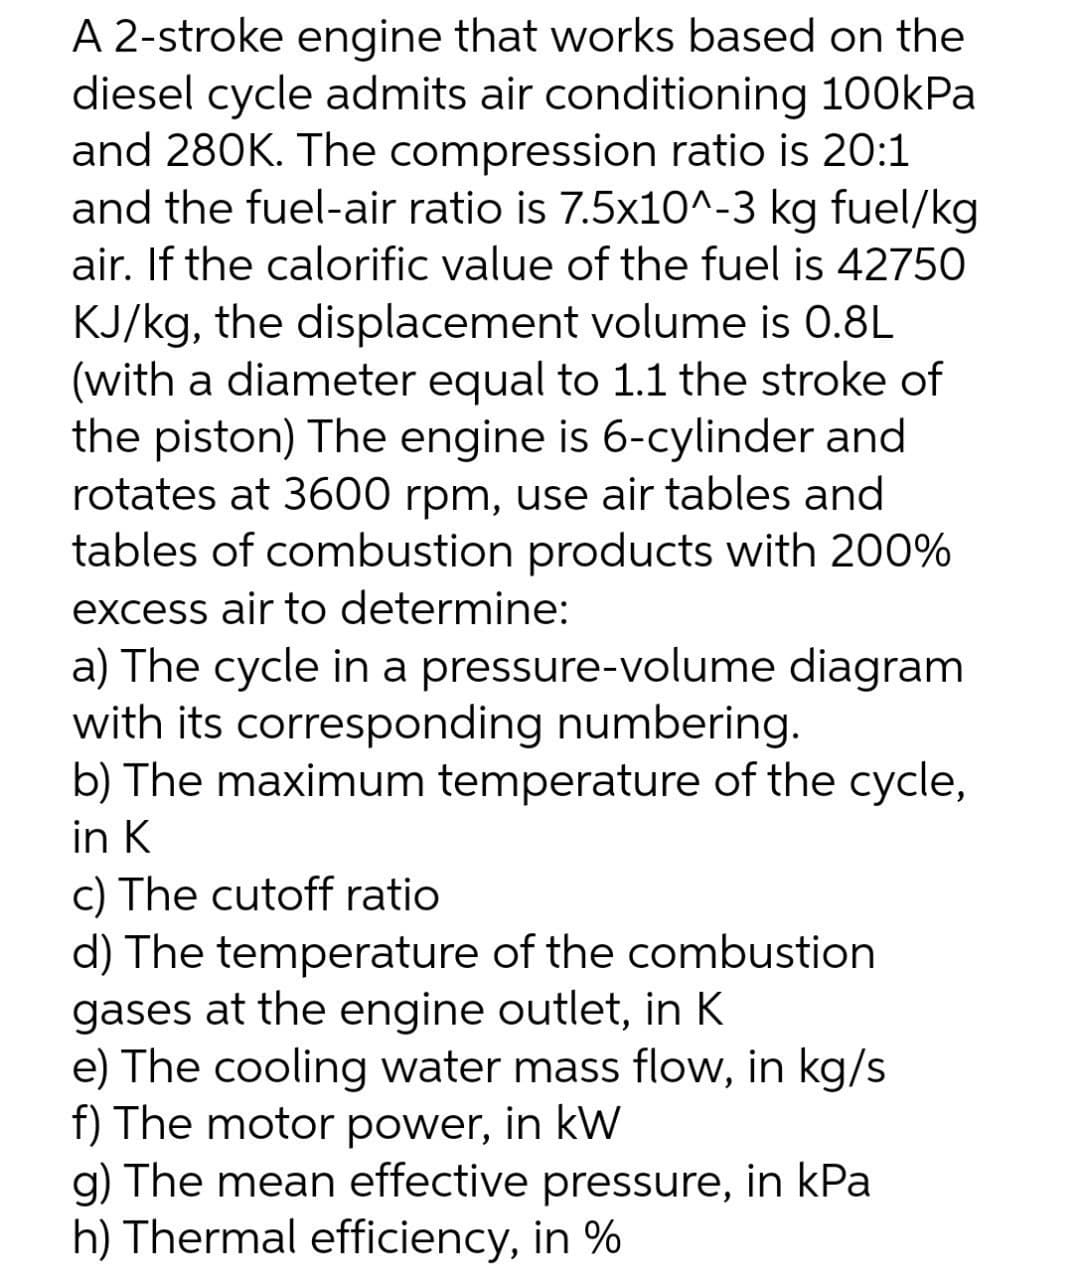 A 2-stroke engine that works based on the
diesel cycle admits air conditioning 100kPa
and 280K. The compression ratio is 20:1
and the fuel-air ratio is 7.5x10^-3 kg fuel/kg
air. If the calorific value of the fuel is 42750
KJ/kg, the displacement volume is 0.8L
(with a diameter equal to 1.1 the stroke of
the piston) The engine is 6-cylinder and
rotates at 3600 rpm, use air tables and
tables of combustion products with 200%
excess air to determine:
a) The cycle in a pressure-volume diagram
with its corresponding numbering.
b) The maximum temperature of the cycle,
in K
c) The cutoff ratio
d) The temperature of the combustion
gases at the engine outlet, in K
e) The cooling water mass flow, in kg/s
f) The motor power, in kW
g) The mean effective pressure, in kPa
h) Thermal efficiency, in %